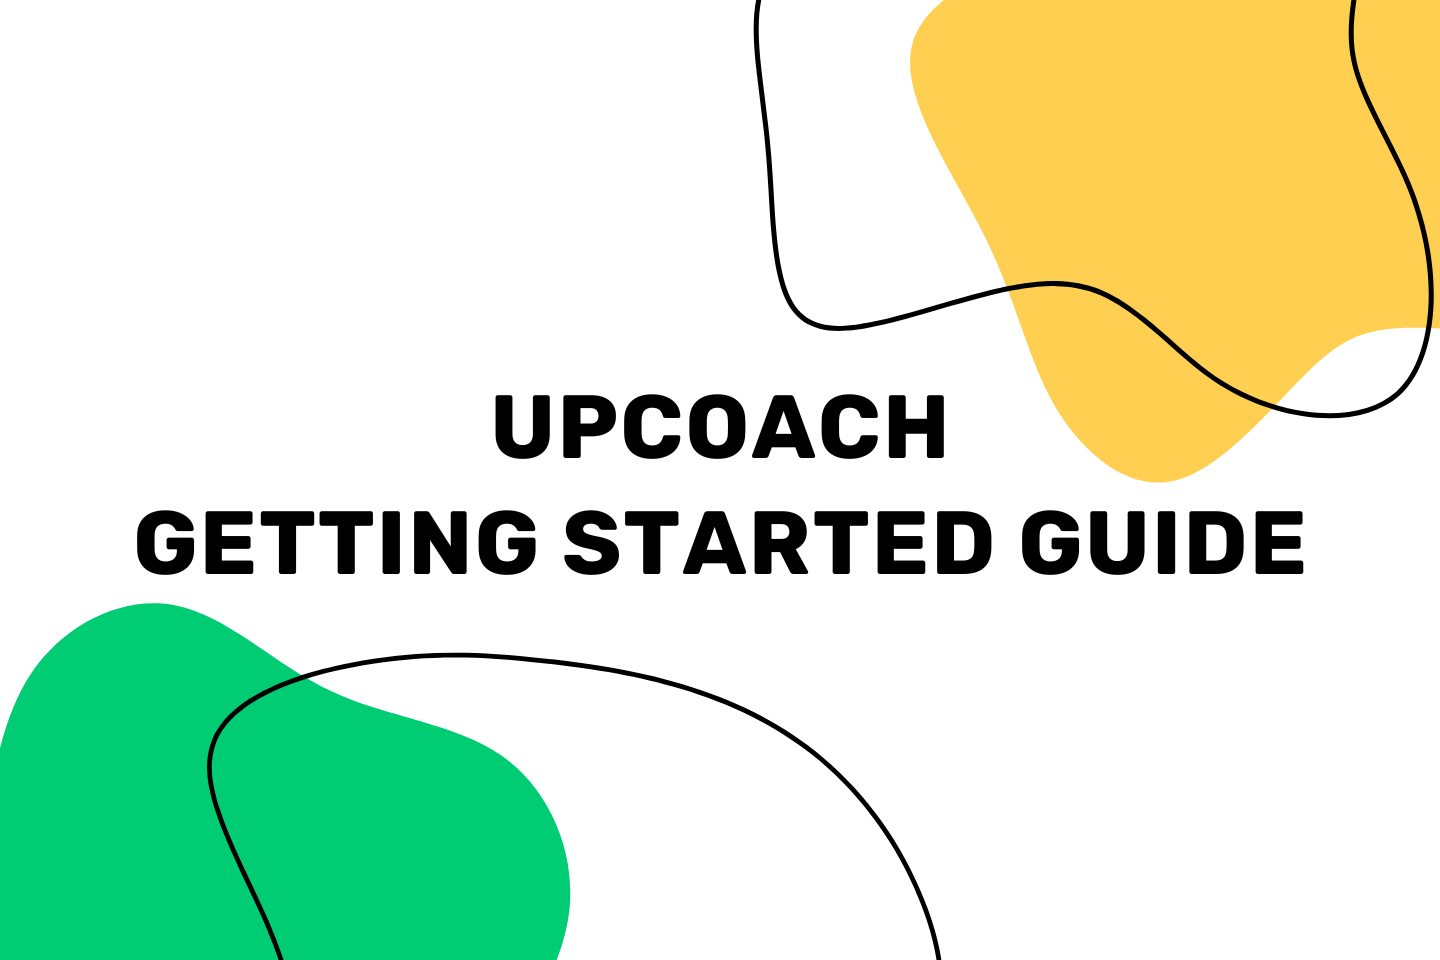 upcoach getting started guide